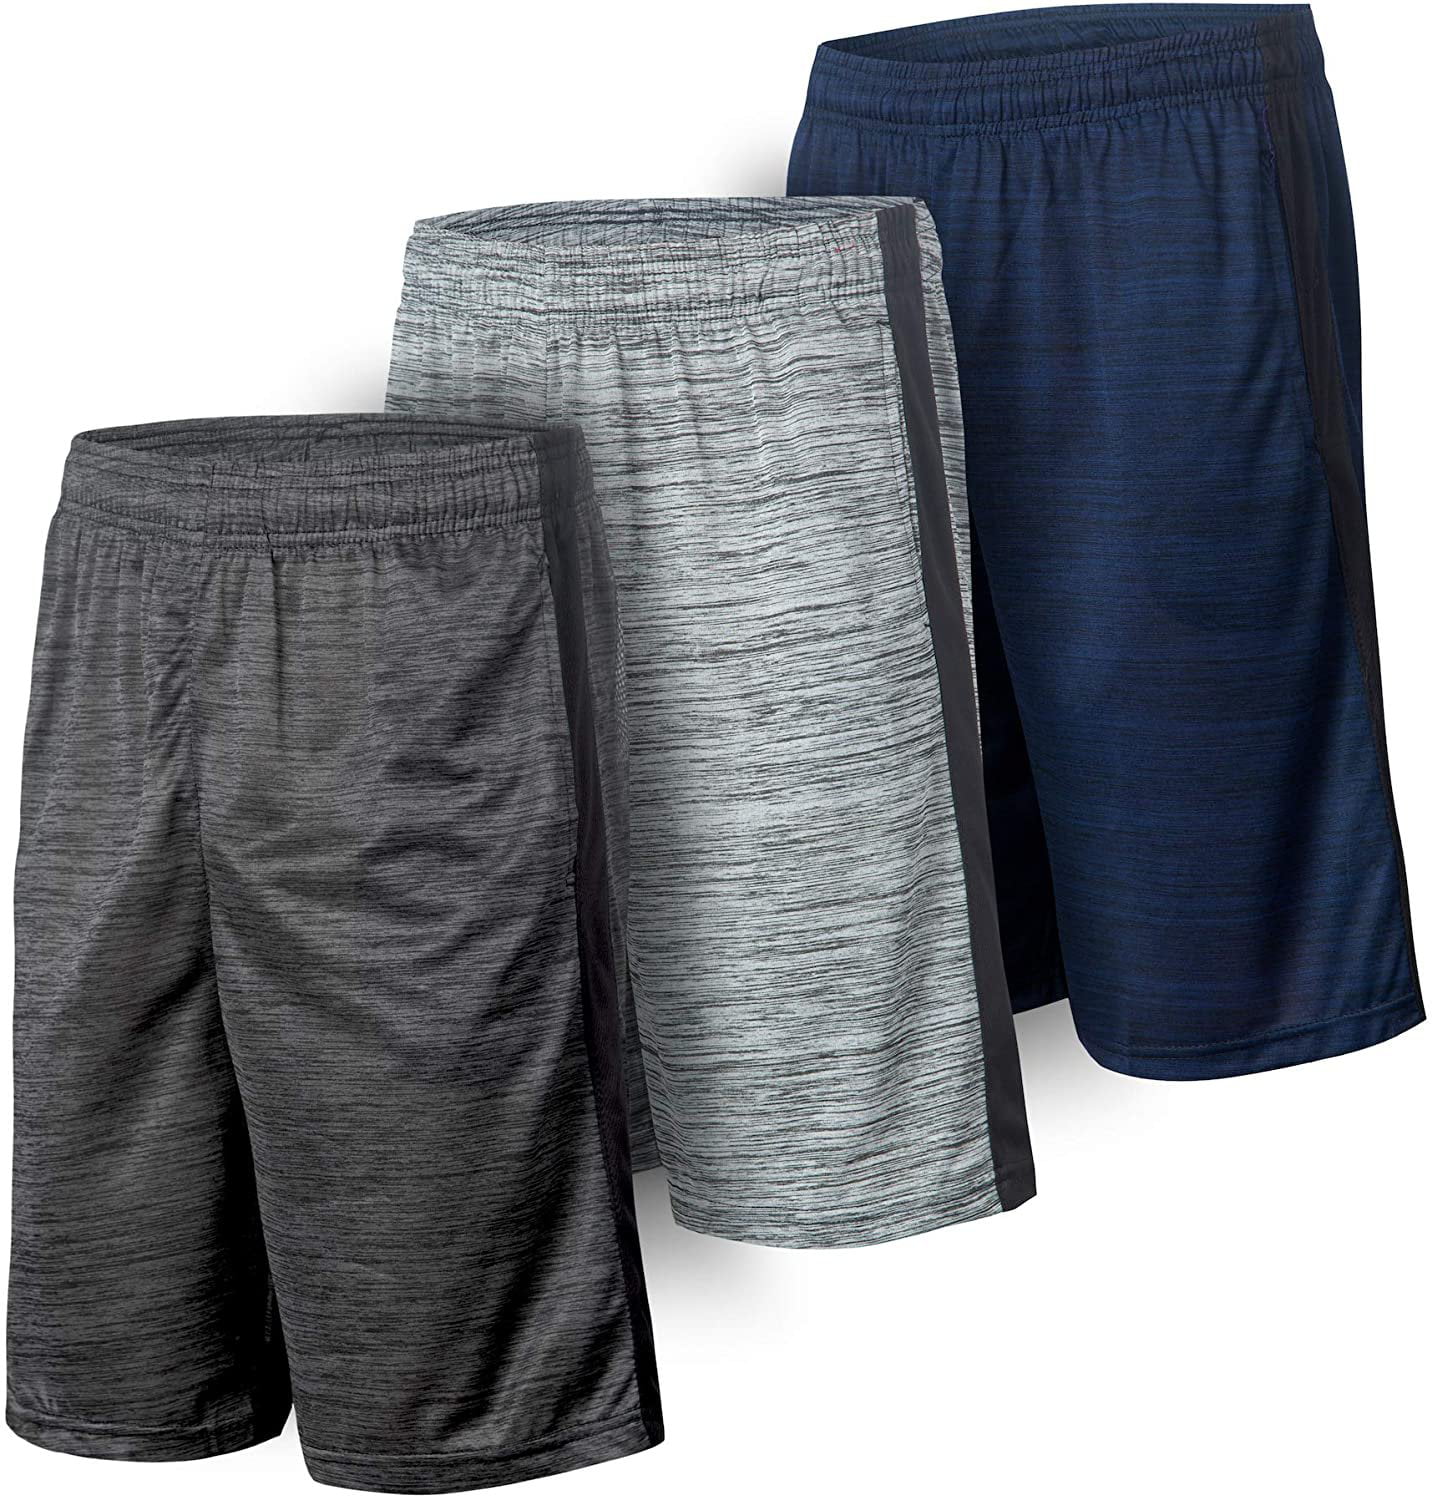 Two-Color 9 Basketball Moisture Wicking Athletic Shorts with Pockets 10 Colors/10 Youth & Adult Sizes